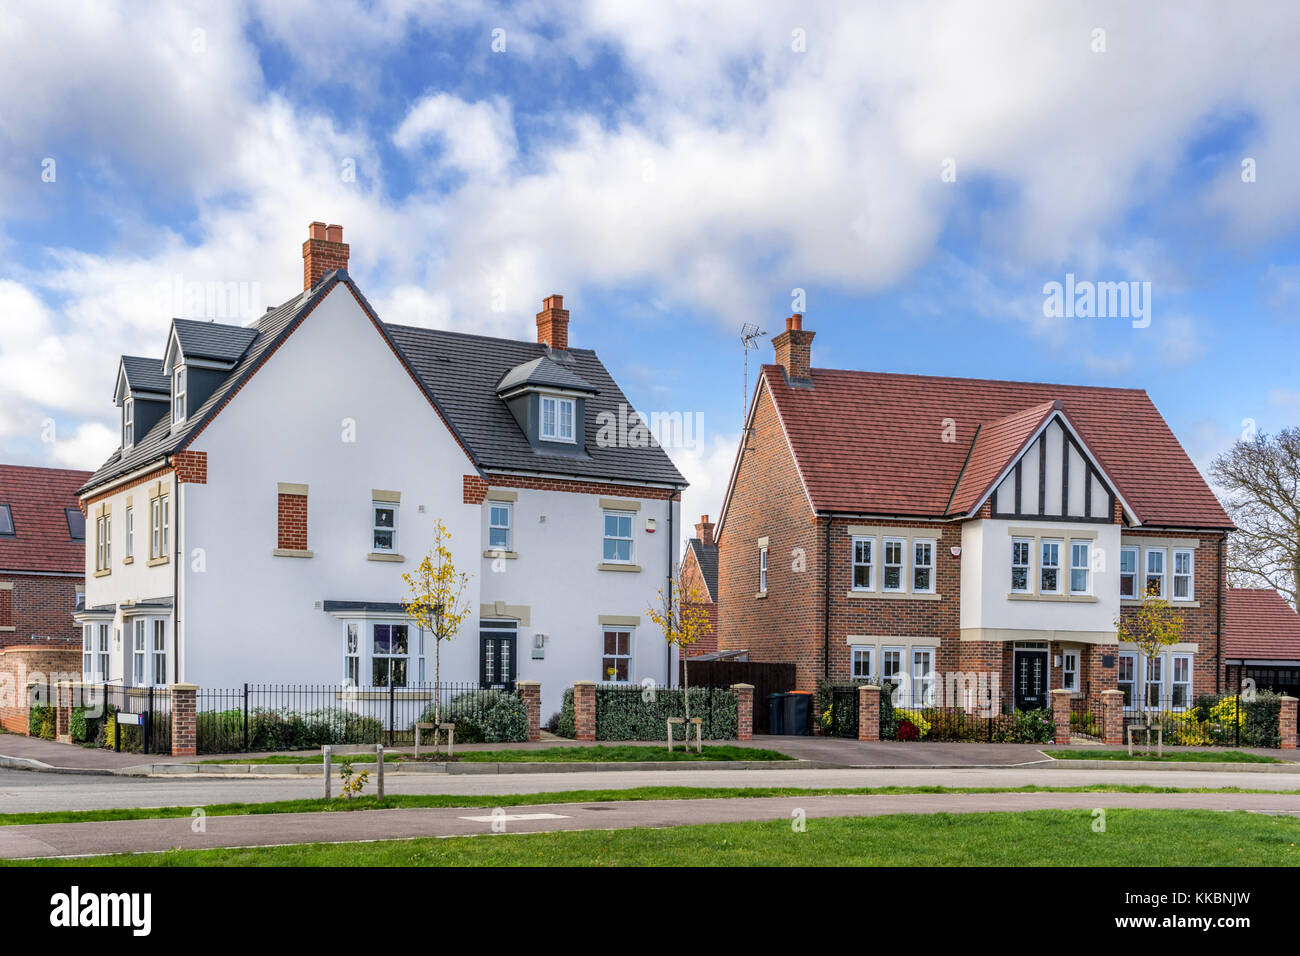 Urban Housing in the south of England Stock Photo